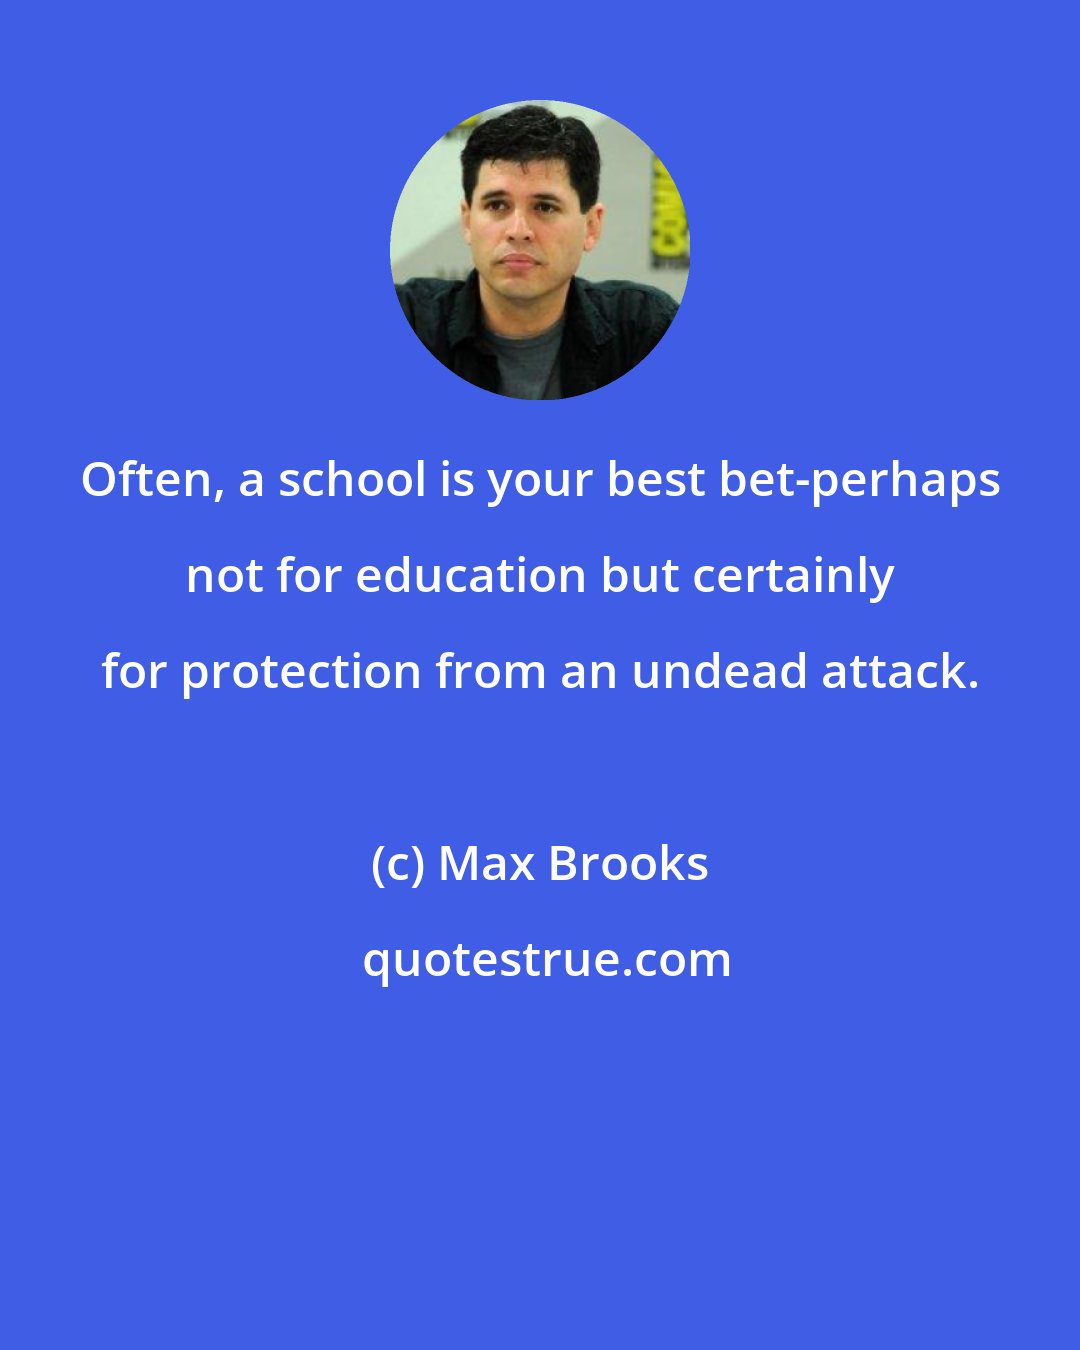 Max Brooks: Often, a school is your best bet-perhaps not for education but certainly for protection from an undead attack.